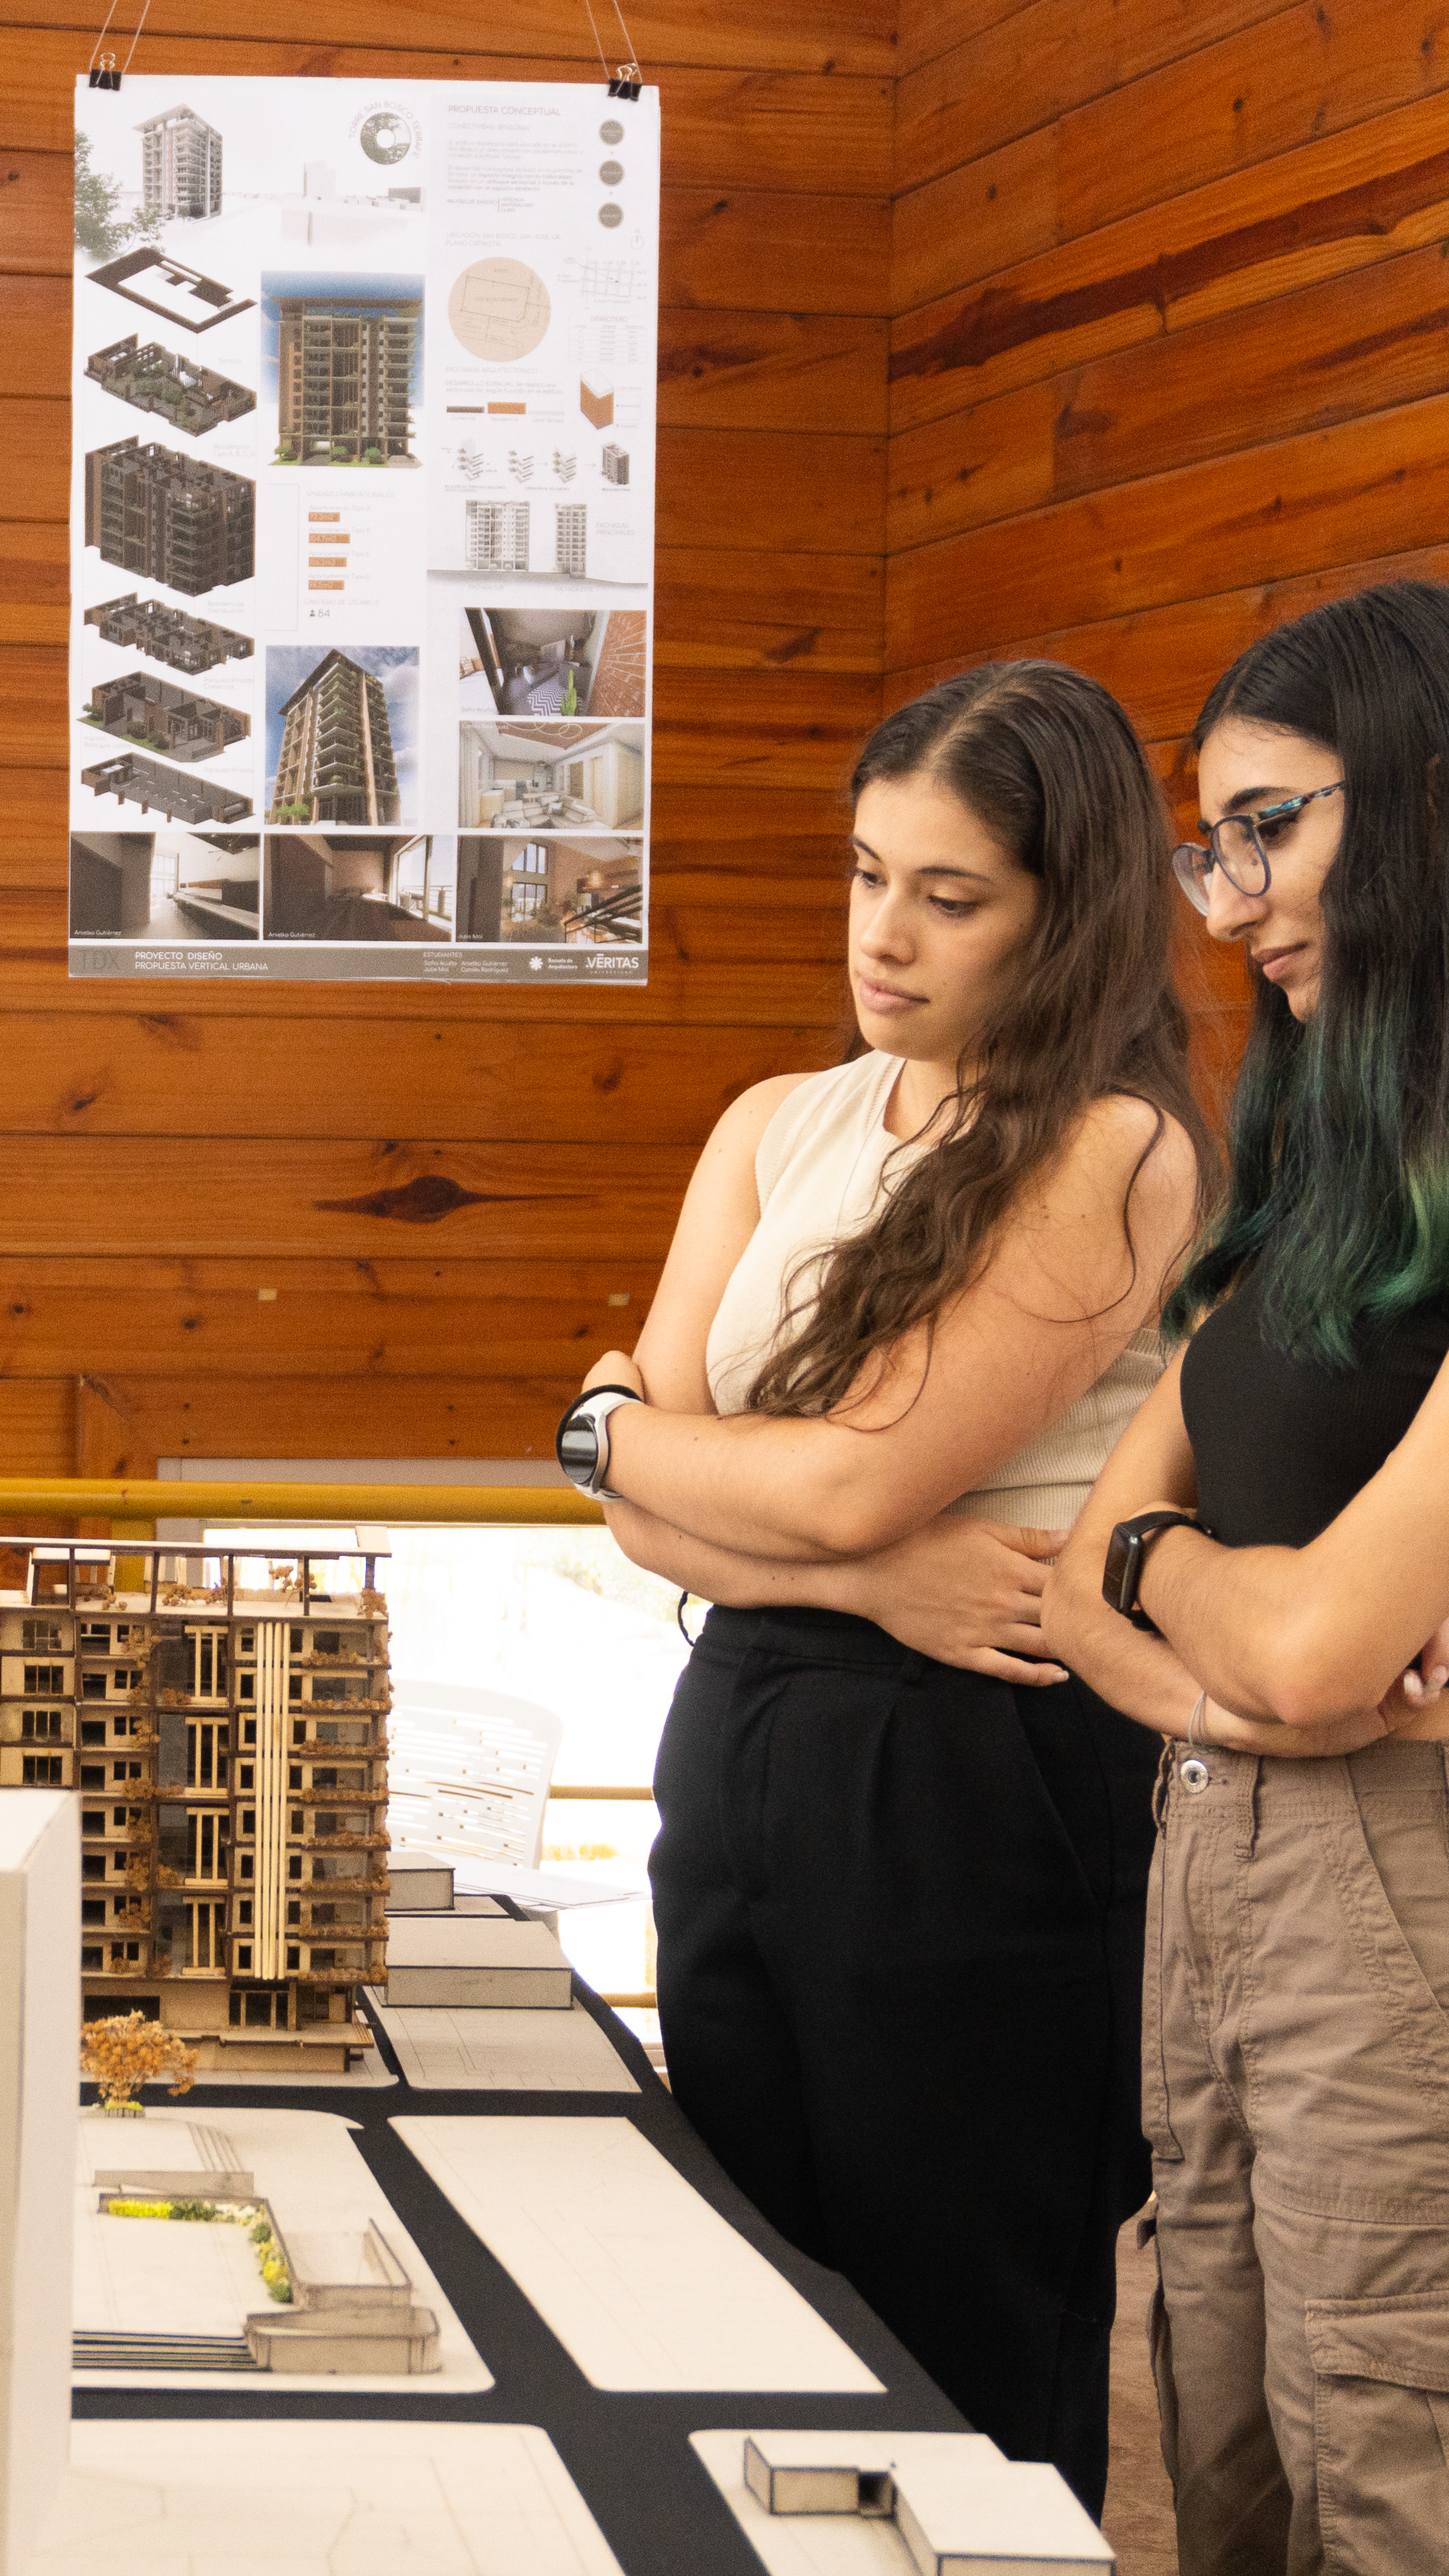 Two students closely examine architectural models and plans displayed on a table.